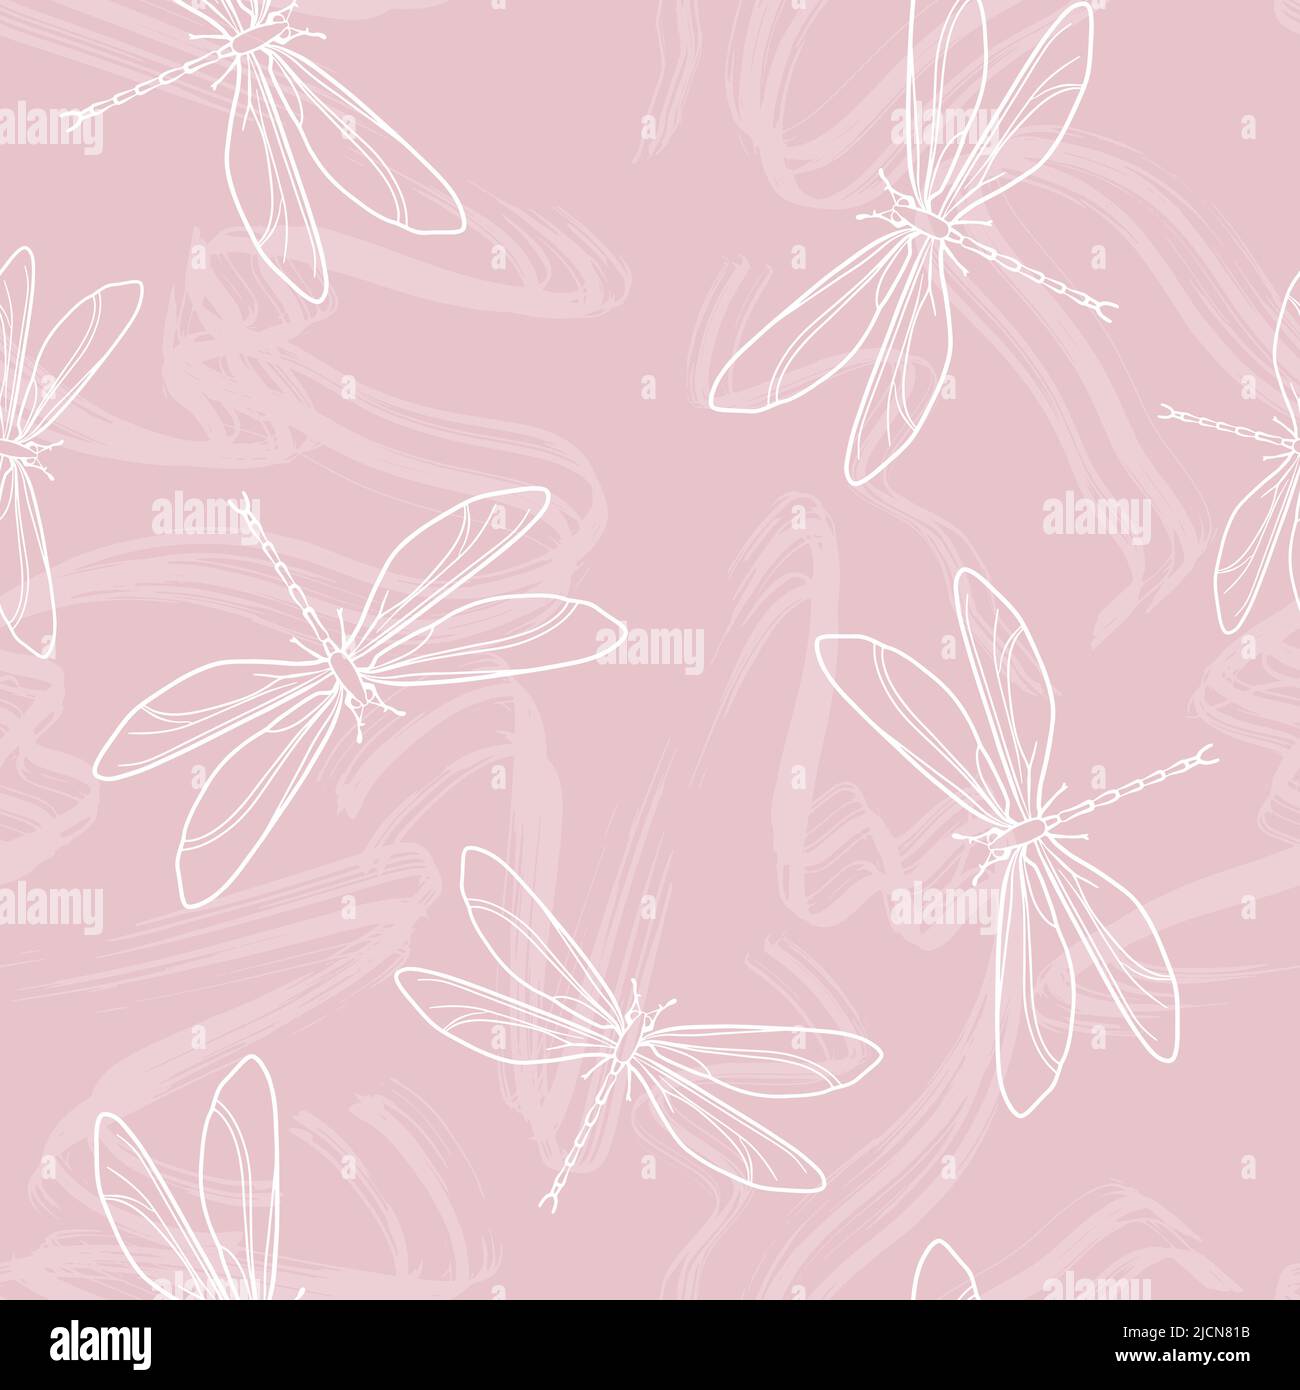 Seamless pattern - grunge brush strokes in pastel pink tones. Abstract vector illustration. Suitable for wrapping paper, various textiles, and as a ba Stock Vector